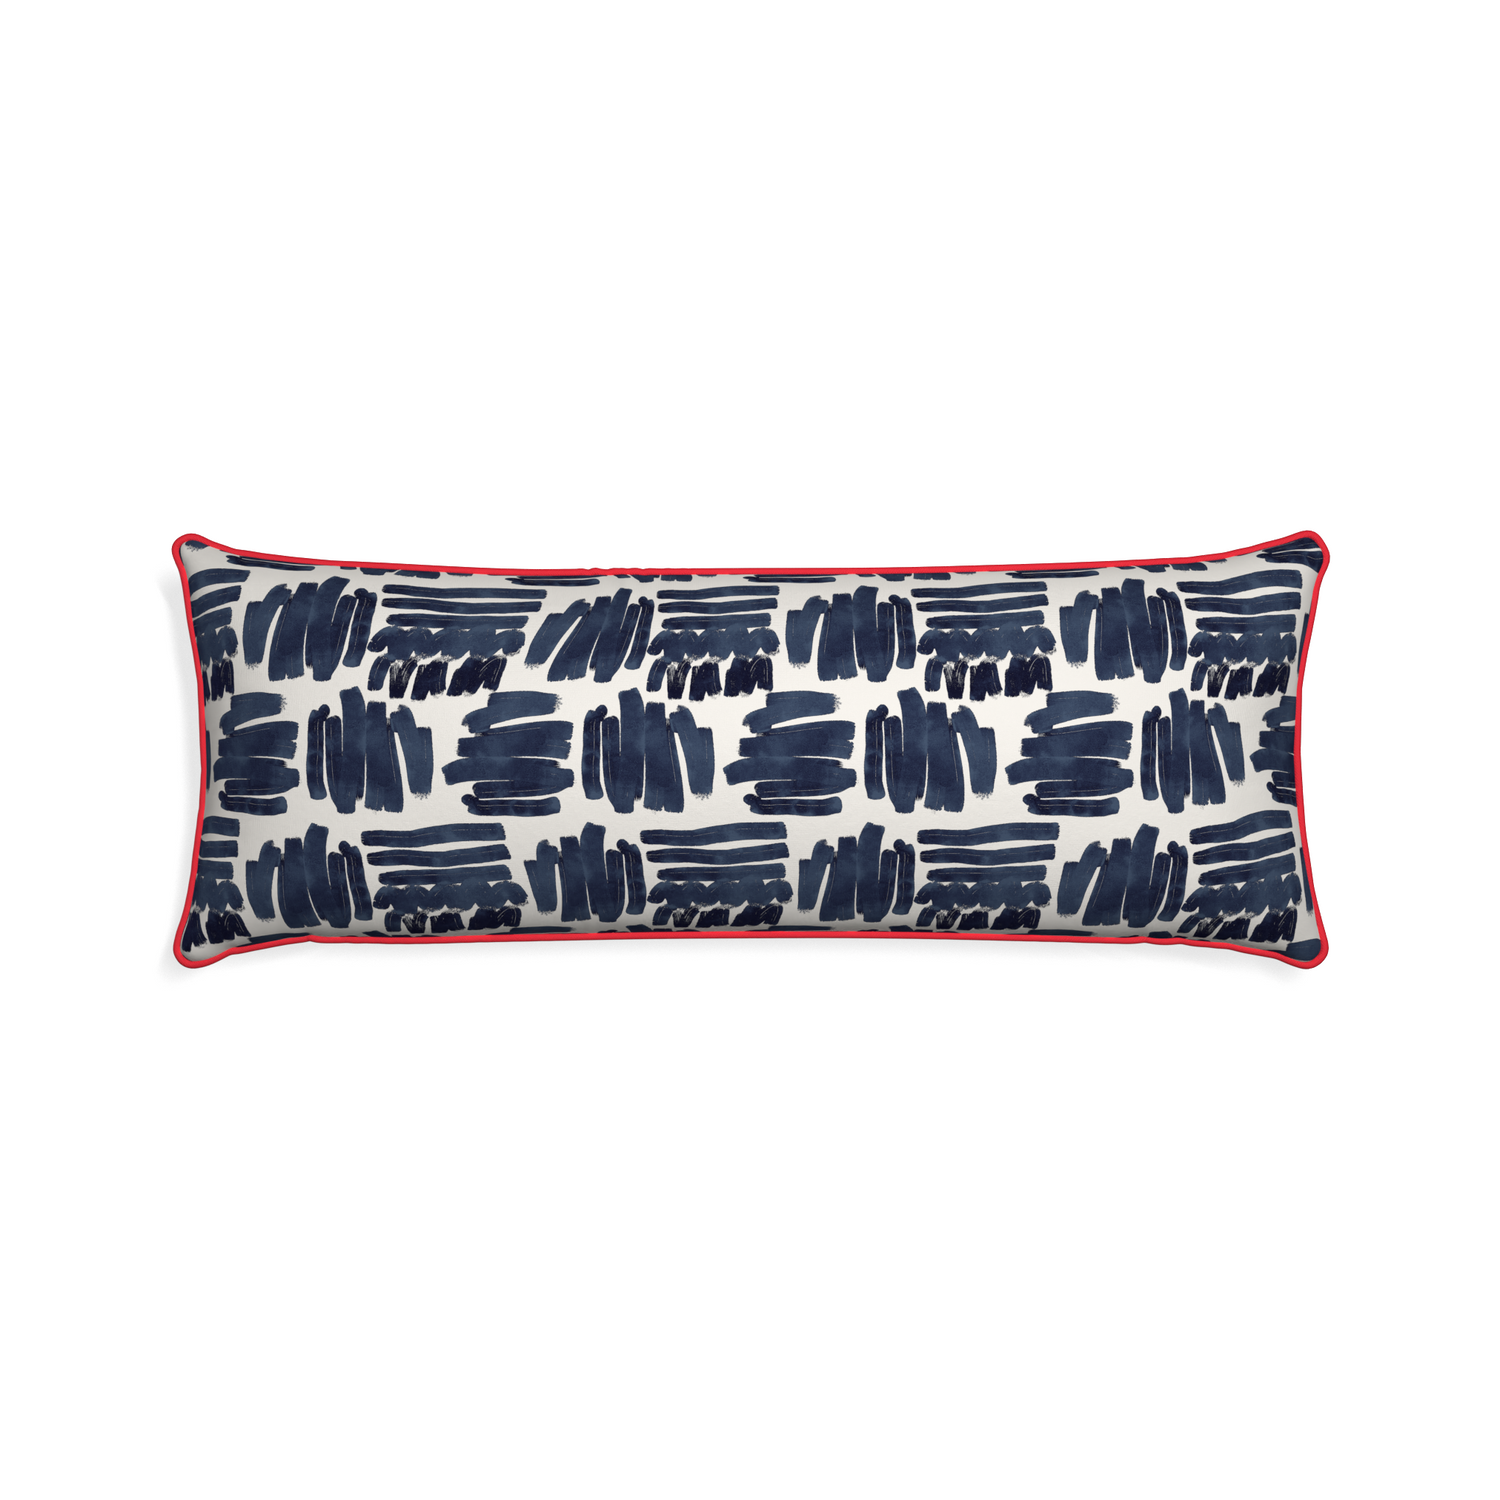 Xl-lumbar warby custom pillow with cherry piping on white background